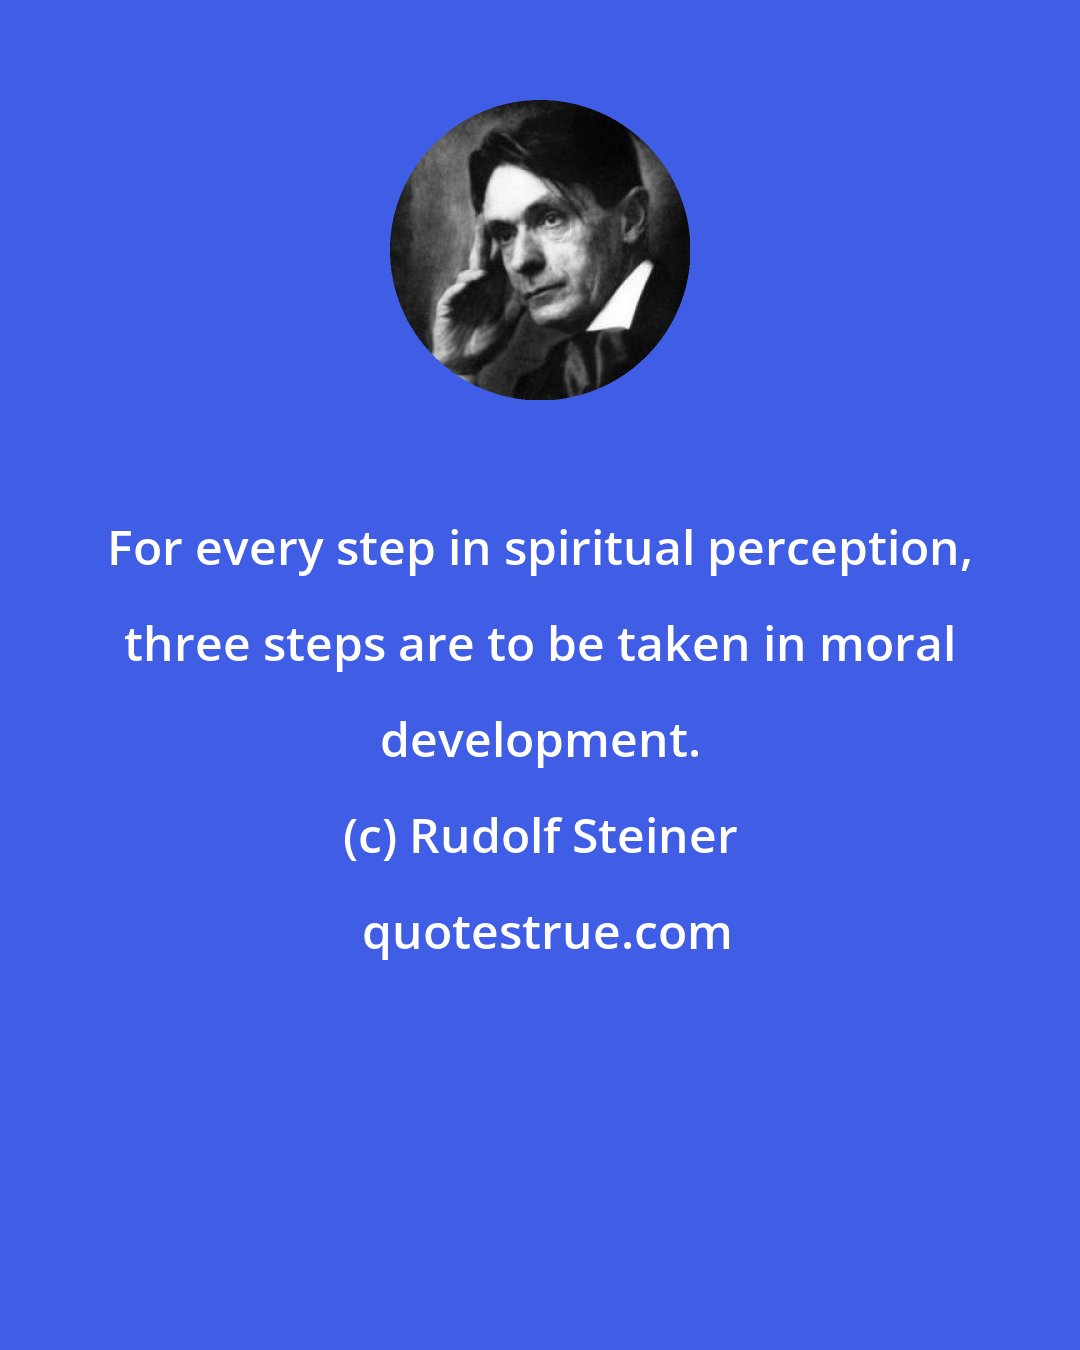 Rudolf Steiner: For every step in spiritual perception, three steps are to be taken in moral development.